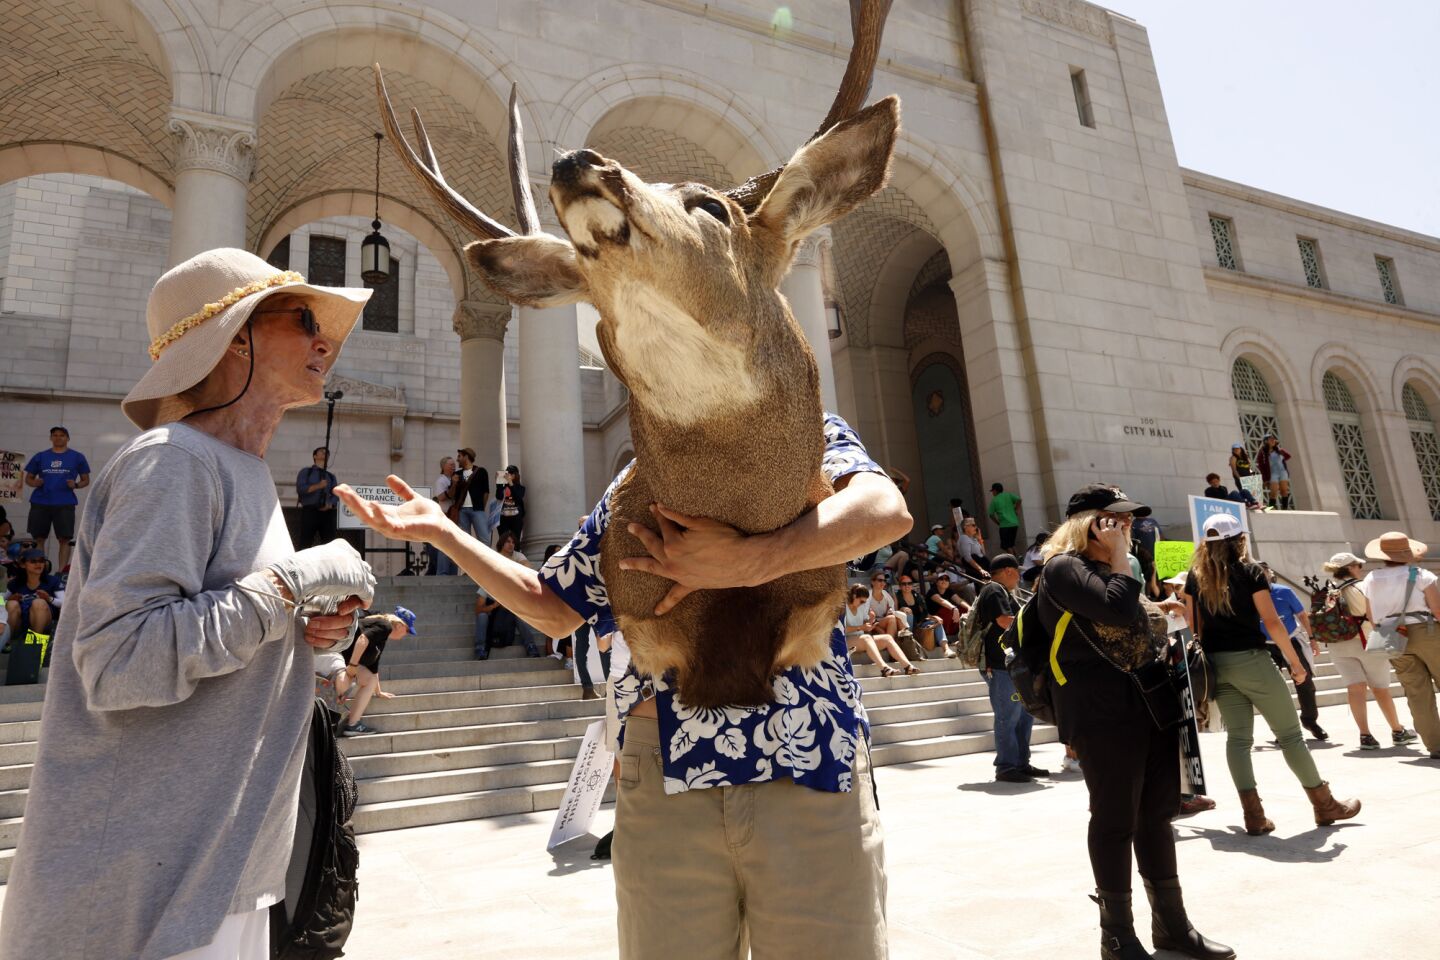 Mike Gloria, 58, holding a deer's head, enjoys a conversation in front of City Hall at the end of the March for Science.